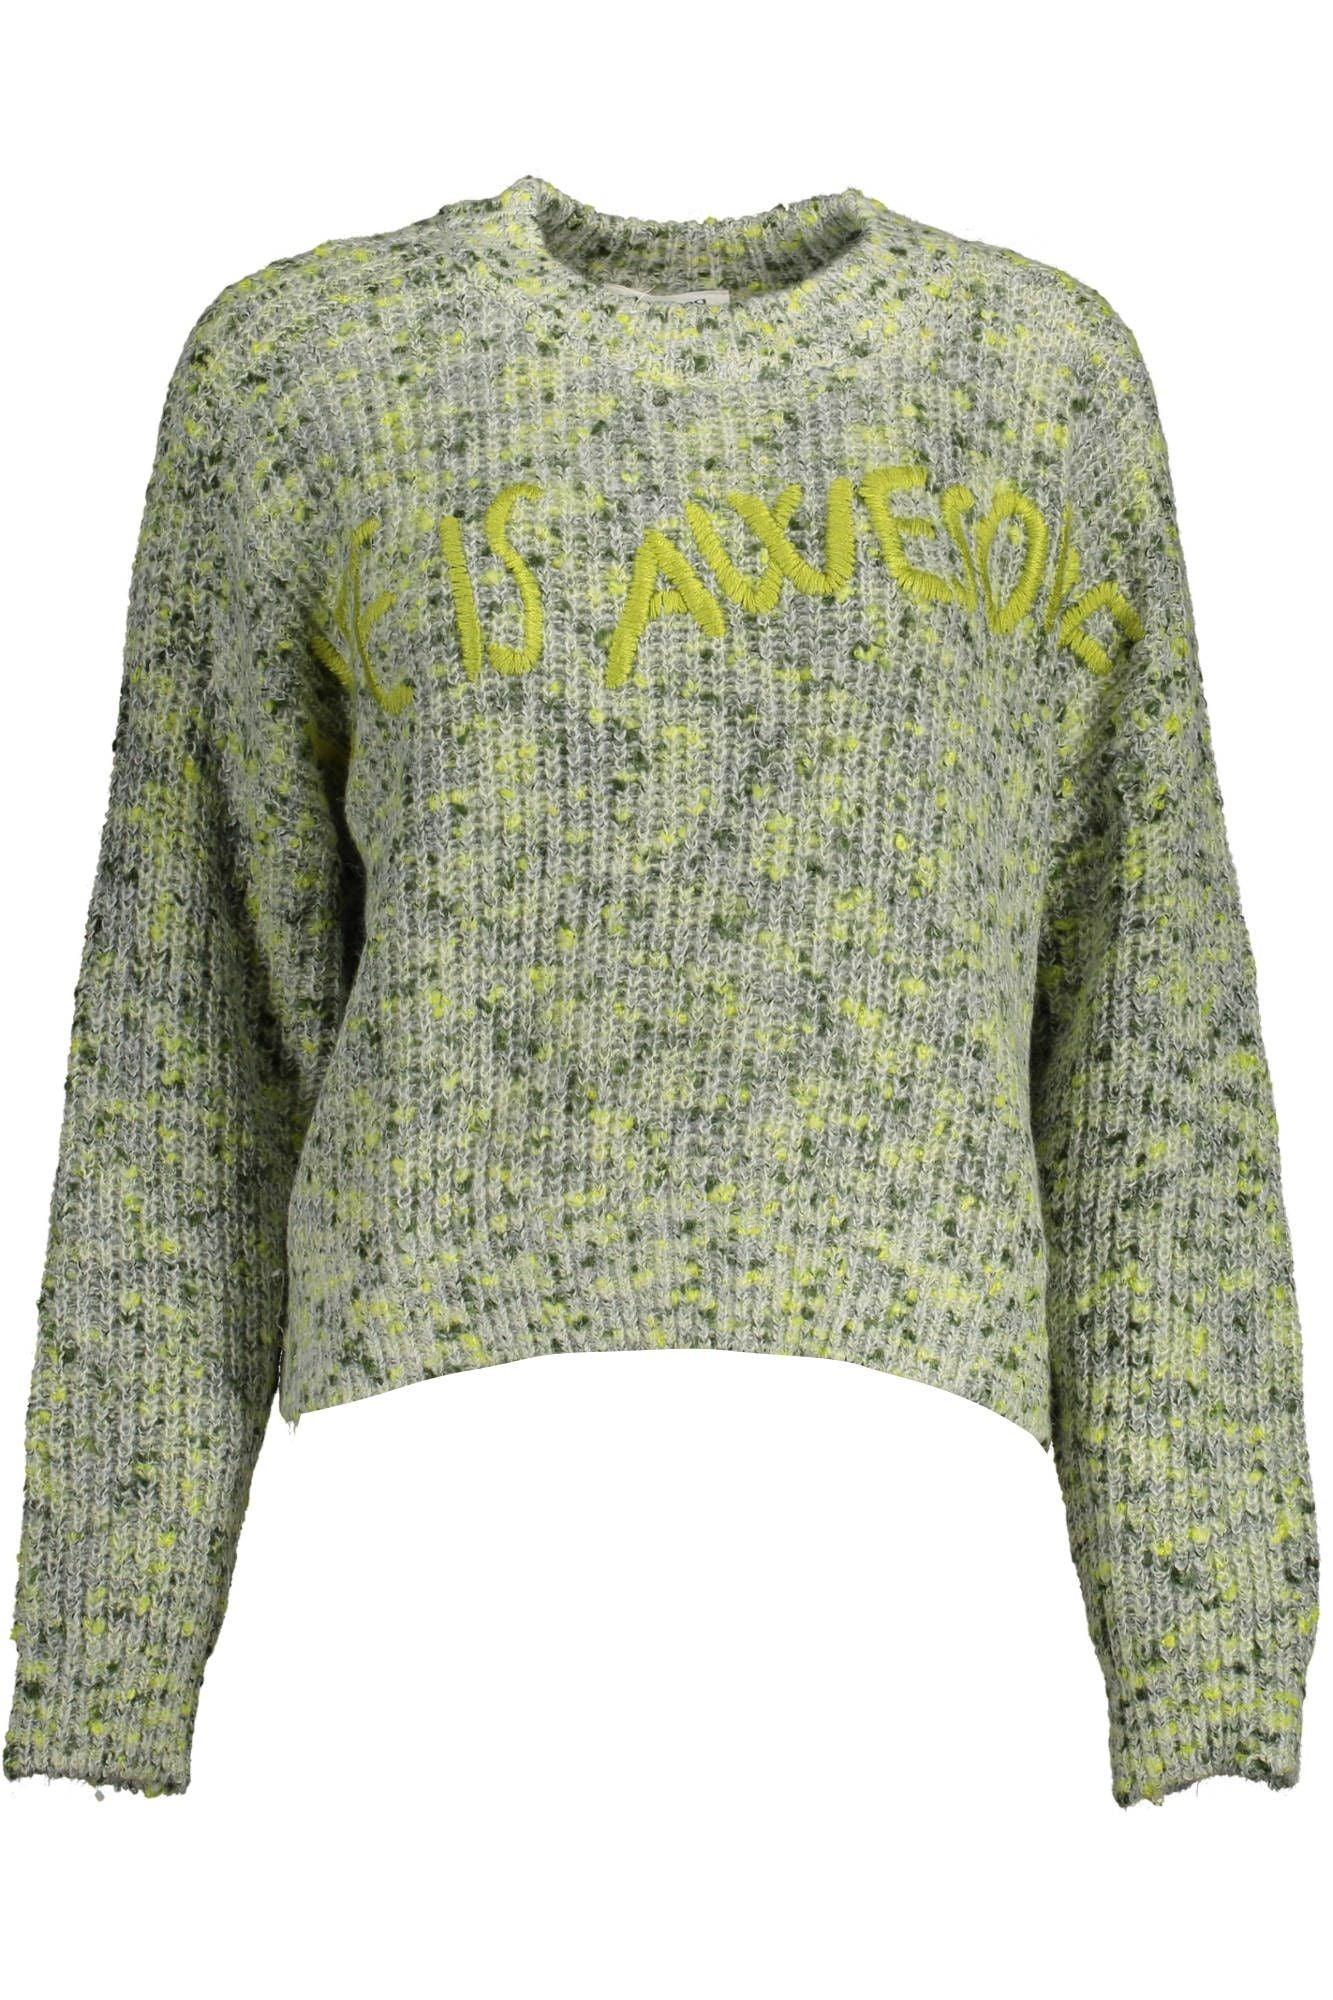 Desigual Green Embroidered Sweater with Contrasting Accents - PER.FASHION